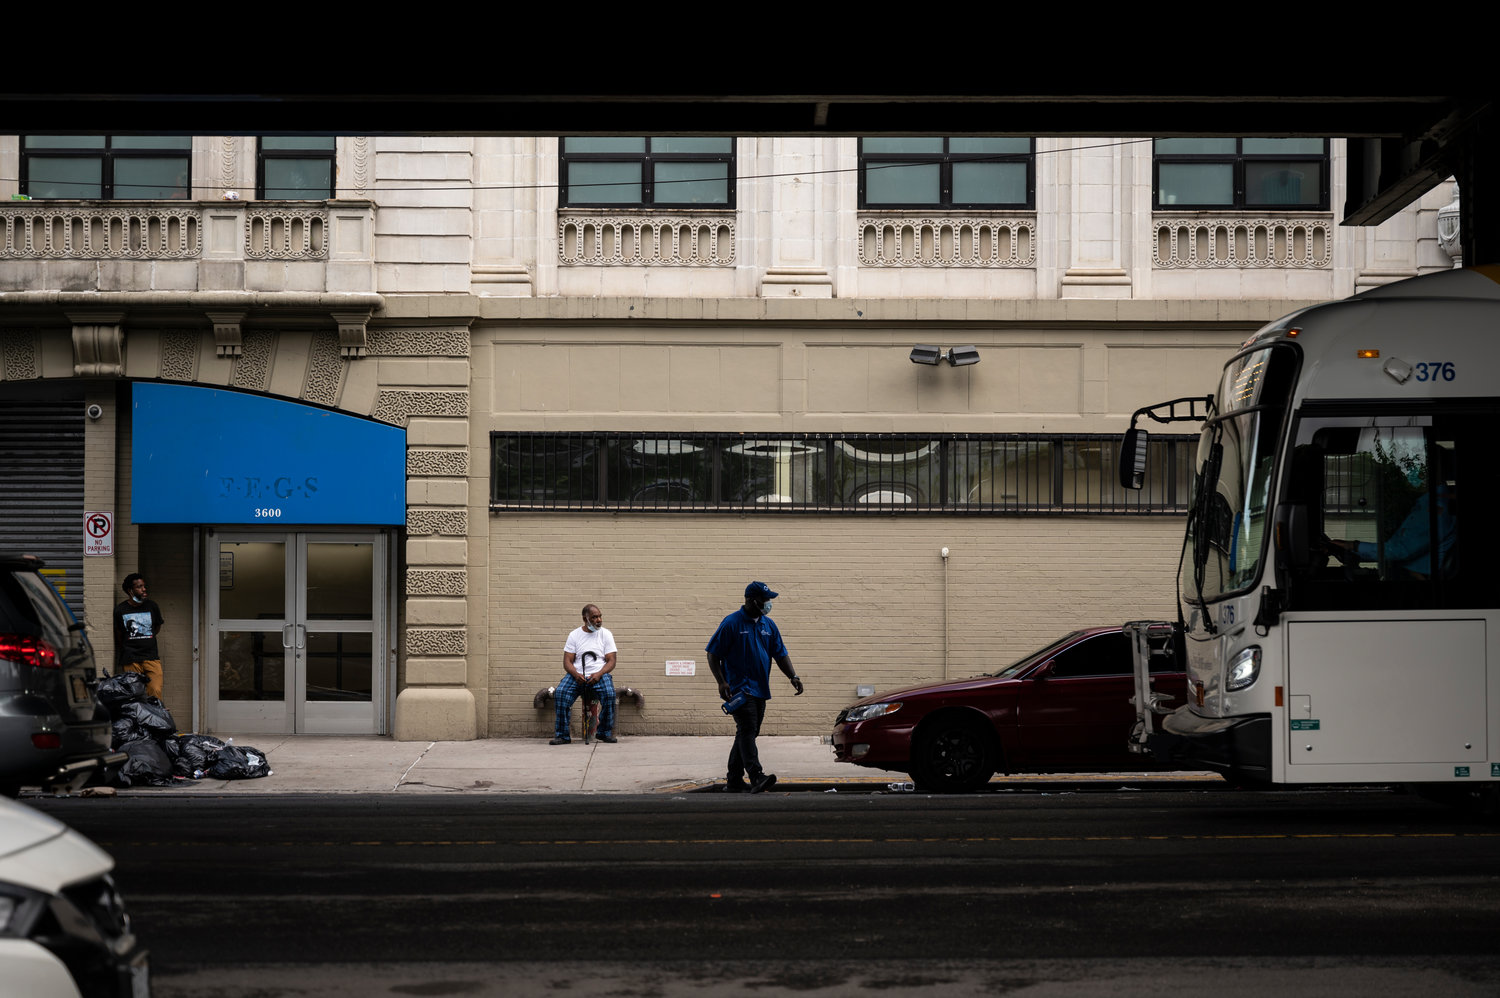 BronxWorks already has moved all 200 residents back into its Jerome Avenue men’s shelter in Norwood last month after many of its residents spent time in hotels.